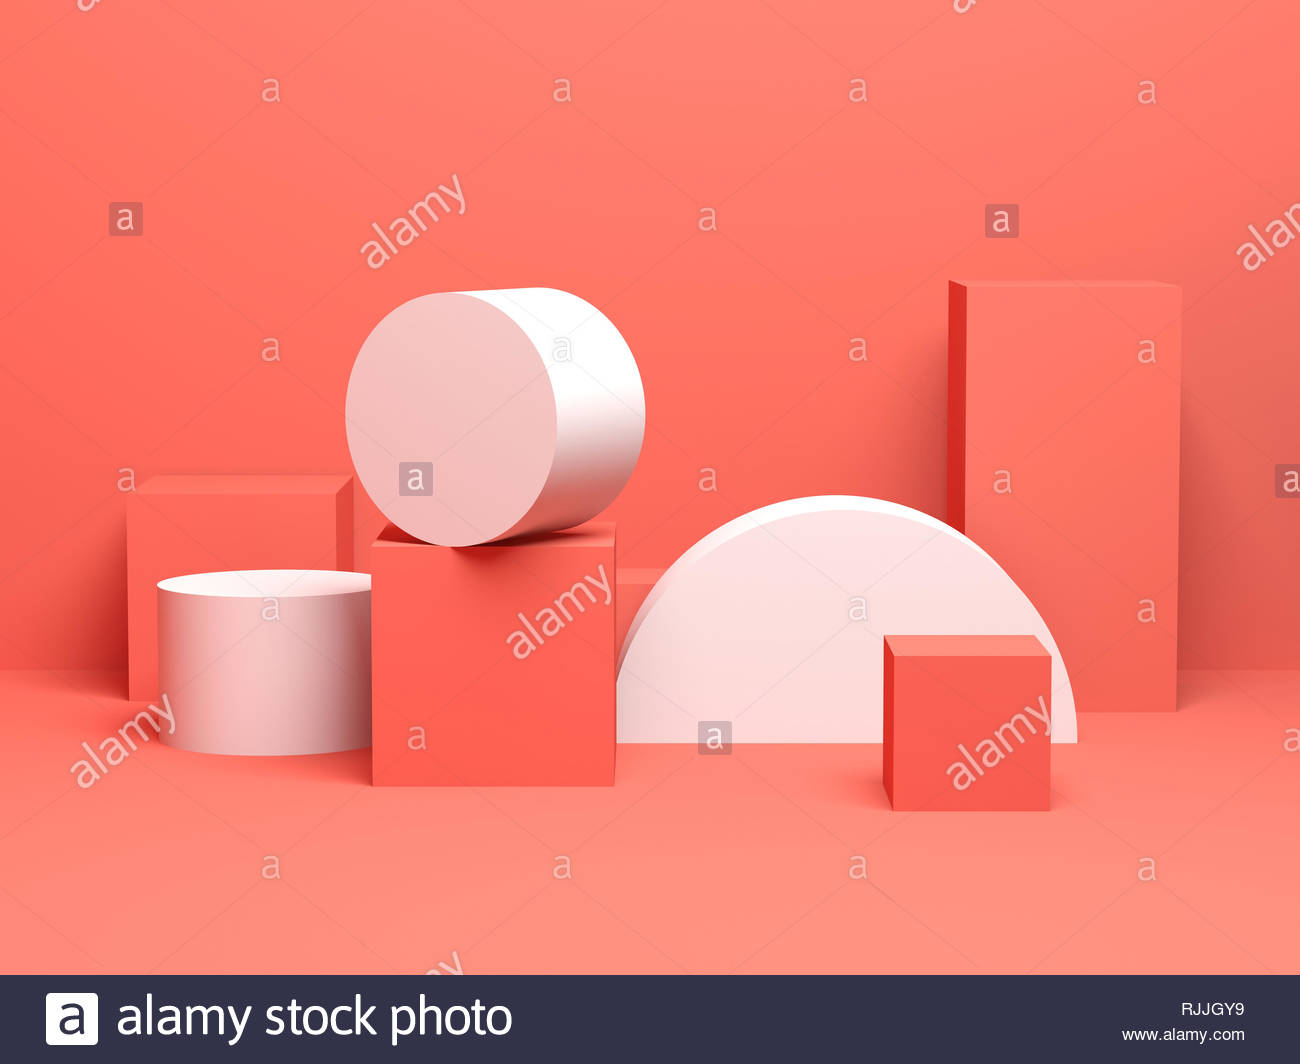 Abstract Colorful Digital Still Life Background With Primitive